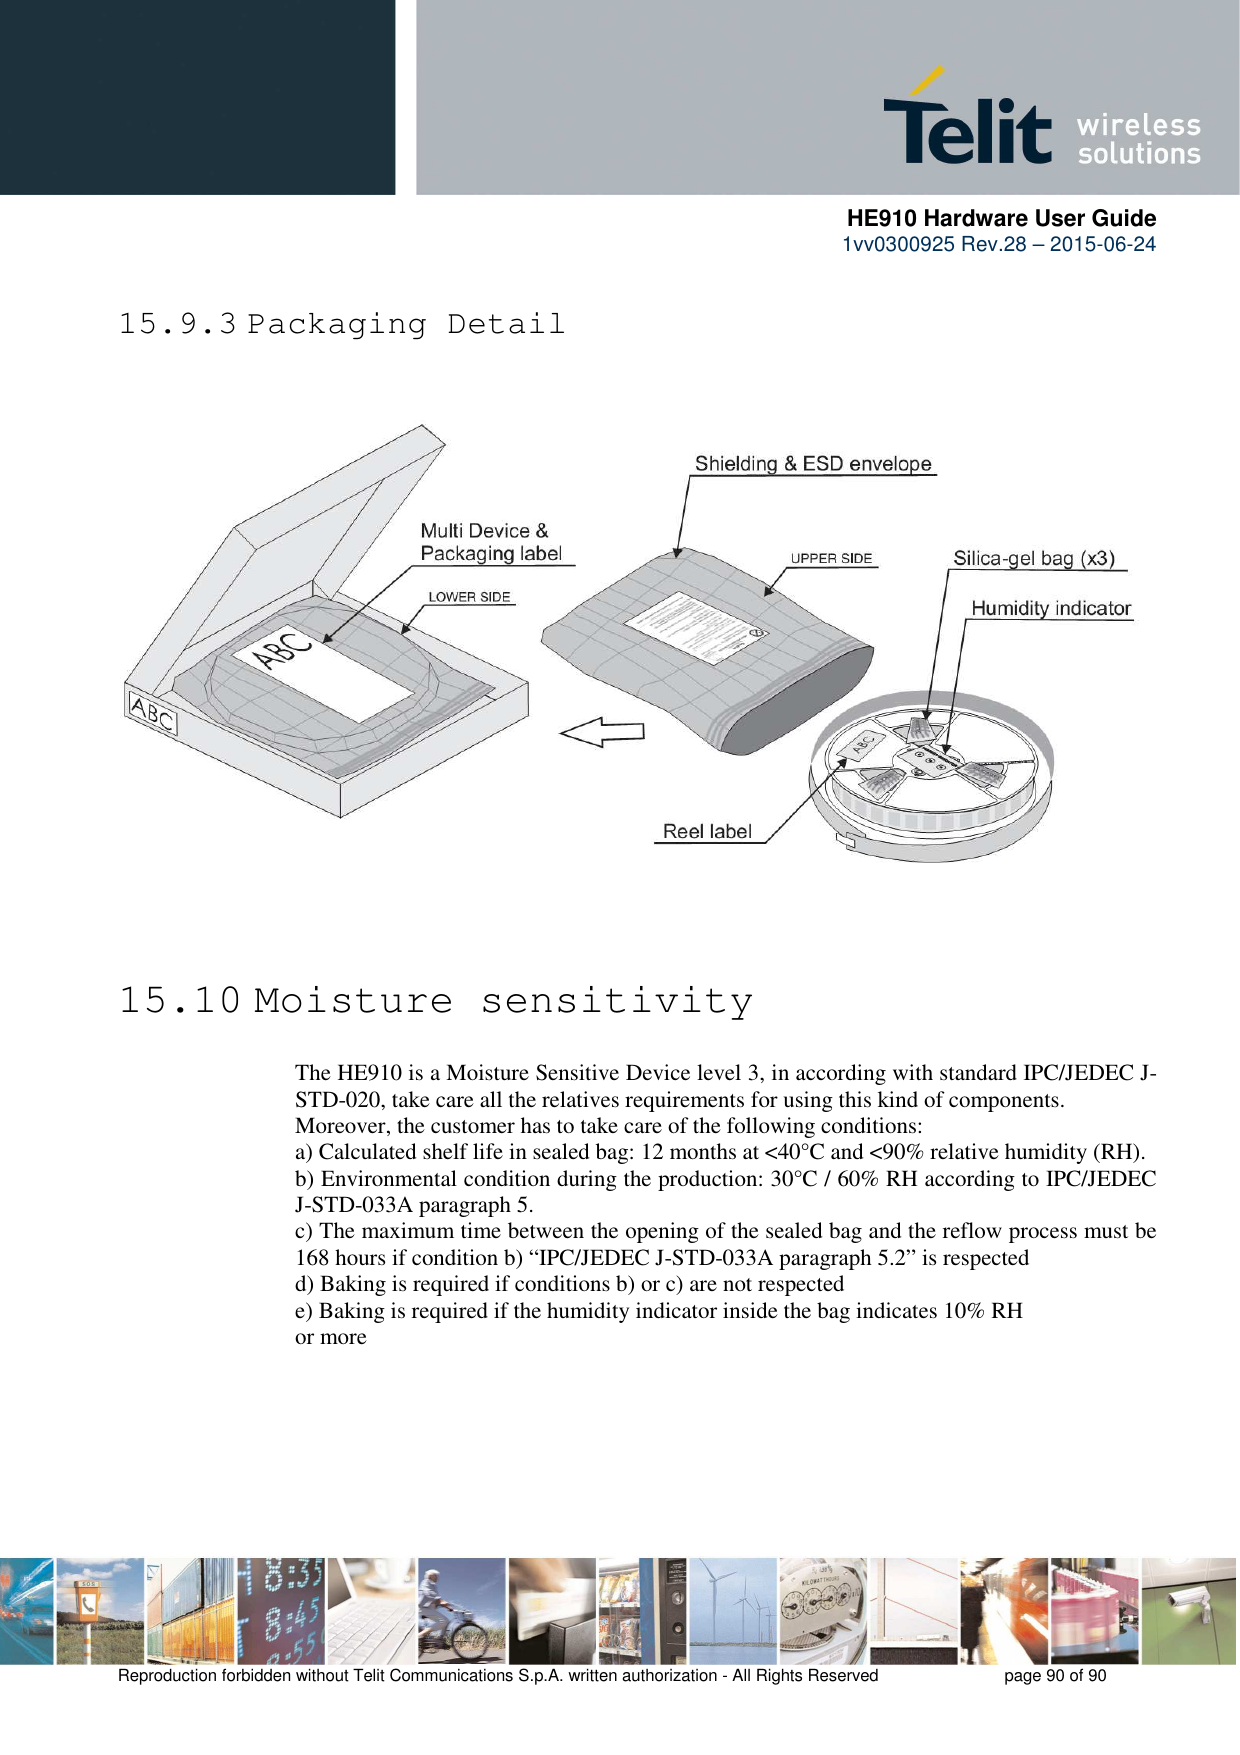      HE910 Hardware User Guide 1vv0300925 Rev.28 – 2015-06-24    Reproduction forbidden without Telit Communications S.p.A. written authorization - All Rights Reserved    page 90 of 90  15.9.3 Packaging Detail      15.10 Moisture sensitivity The HE910 is a Moisture Sensitive Device level 3, in according with standard IPC/JEDEC J-STD-020, take care all the relatives requirements for using this kind of components. Moreover, the customer has to take care of the following conditions: a) Calculated shelf life in sealed bag: 12 months at &lt;40°C and &lt;90% relative humidity (RH). b) Environmental condition during the production: 30°C / 60% RH according to IPC/JEDEC J-STD-033A paragraph 5. c) The maximum time between the opening of the sealed bag and the reflow process must be 168 hours if condition b) “IPC/JEDEC J-STD-033A paragraph 5.2” is respected d) Baking is required if conditions b) or c) are not respected e) Baking is required if the humidity indicator inside the bag indicates 10% RH or more        